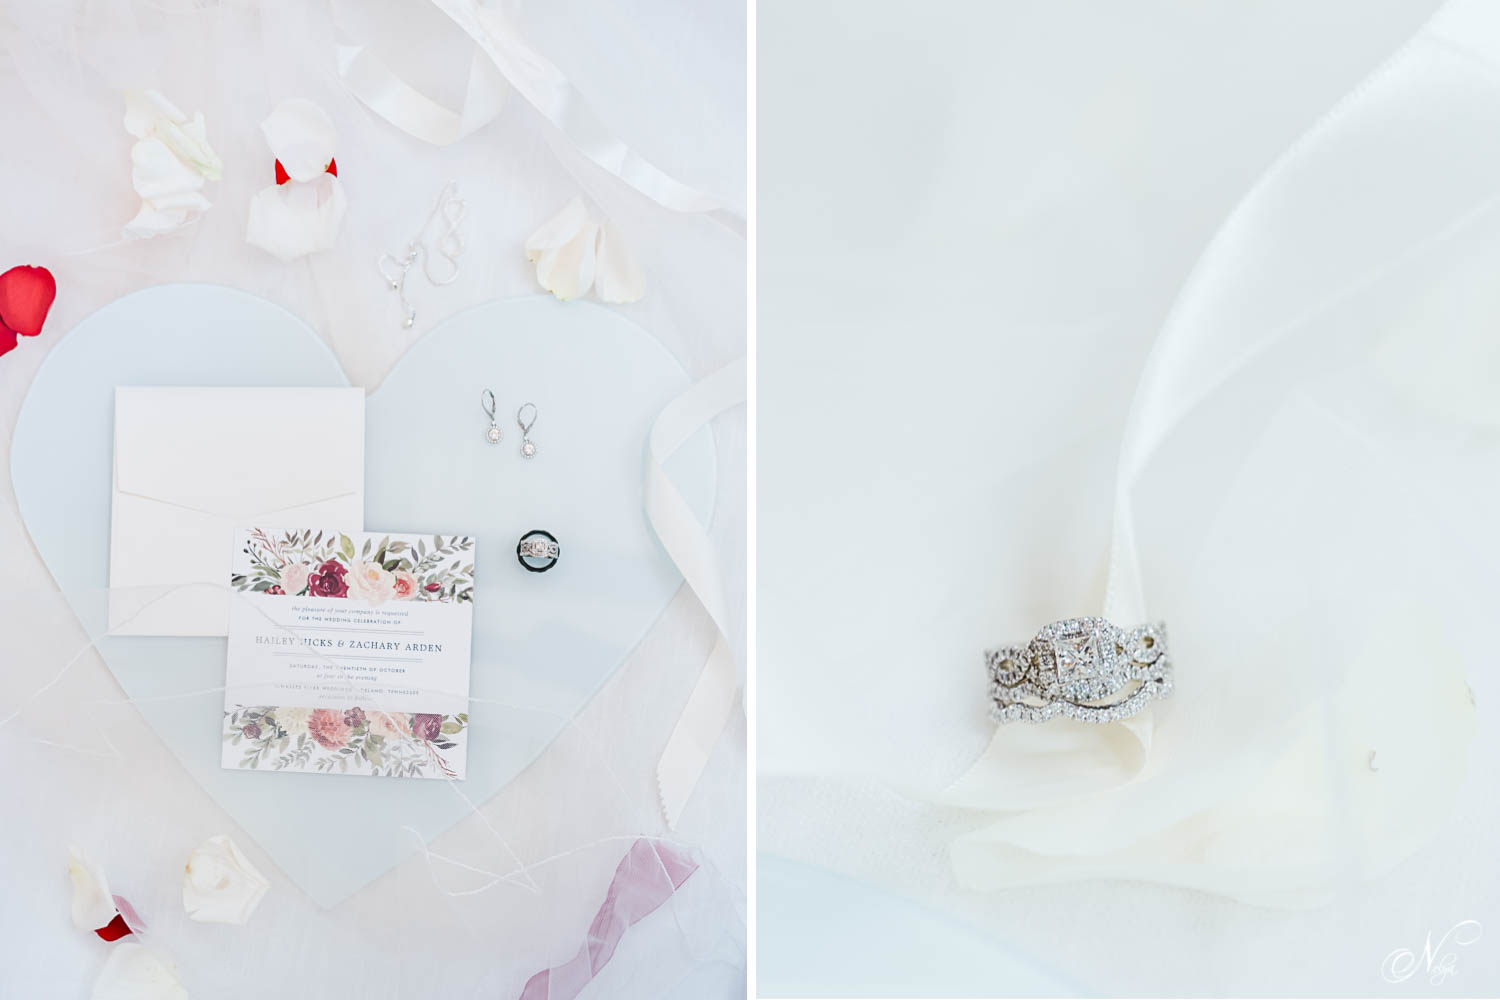 styled wedding details on light blue glass heart. and a wedding ring and engagement ring with white ribbon.